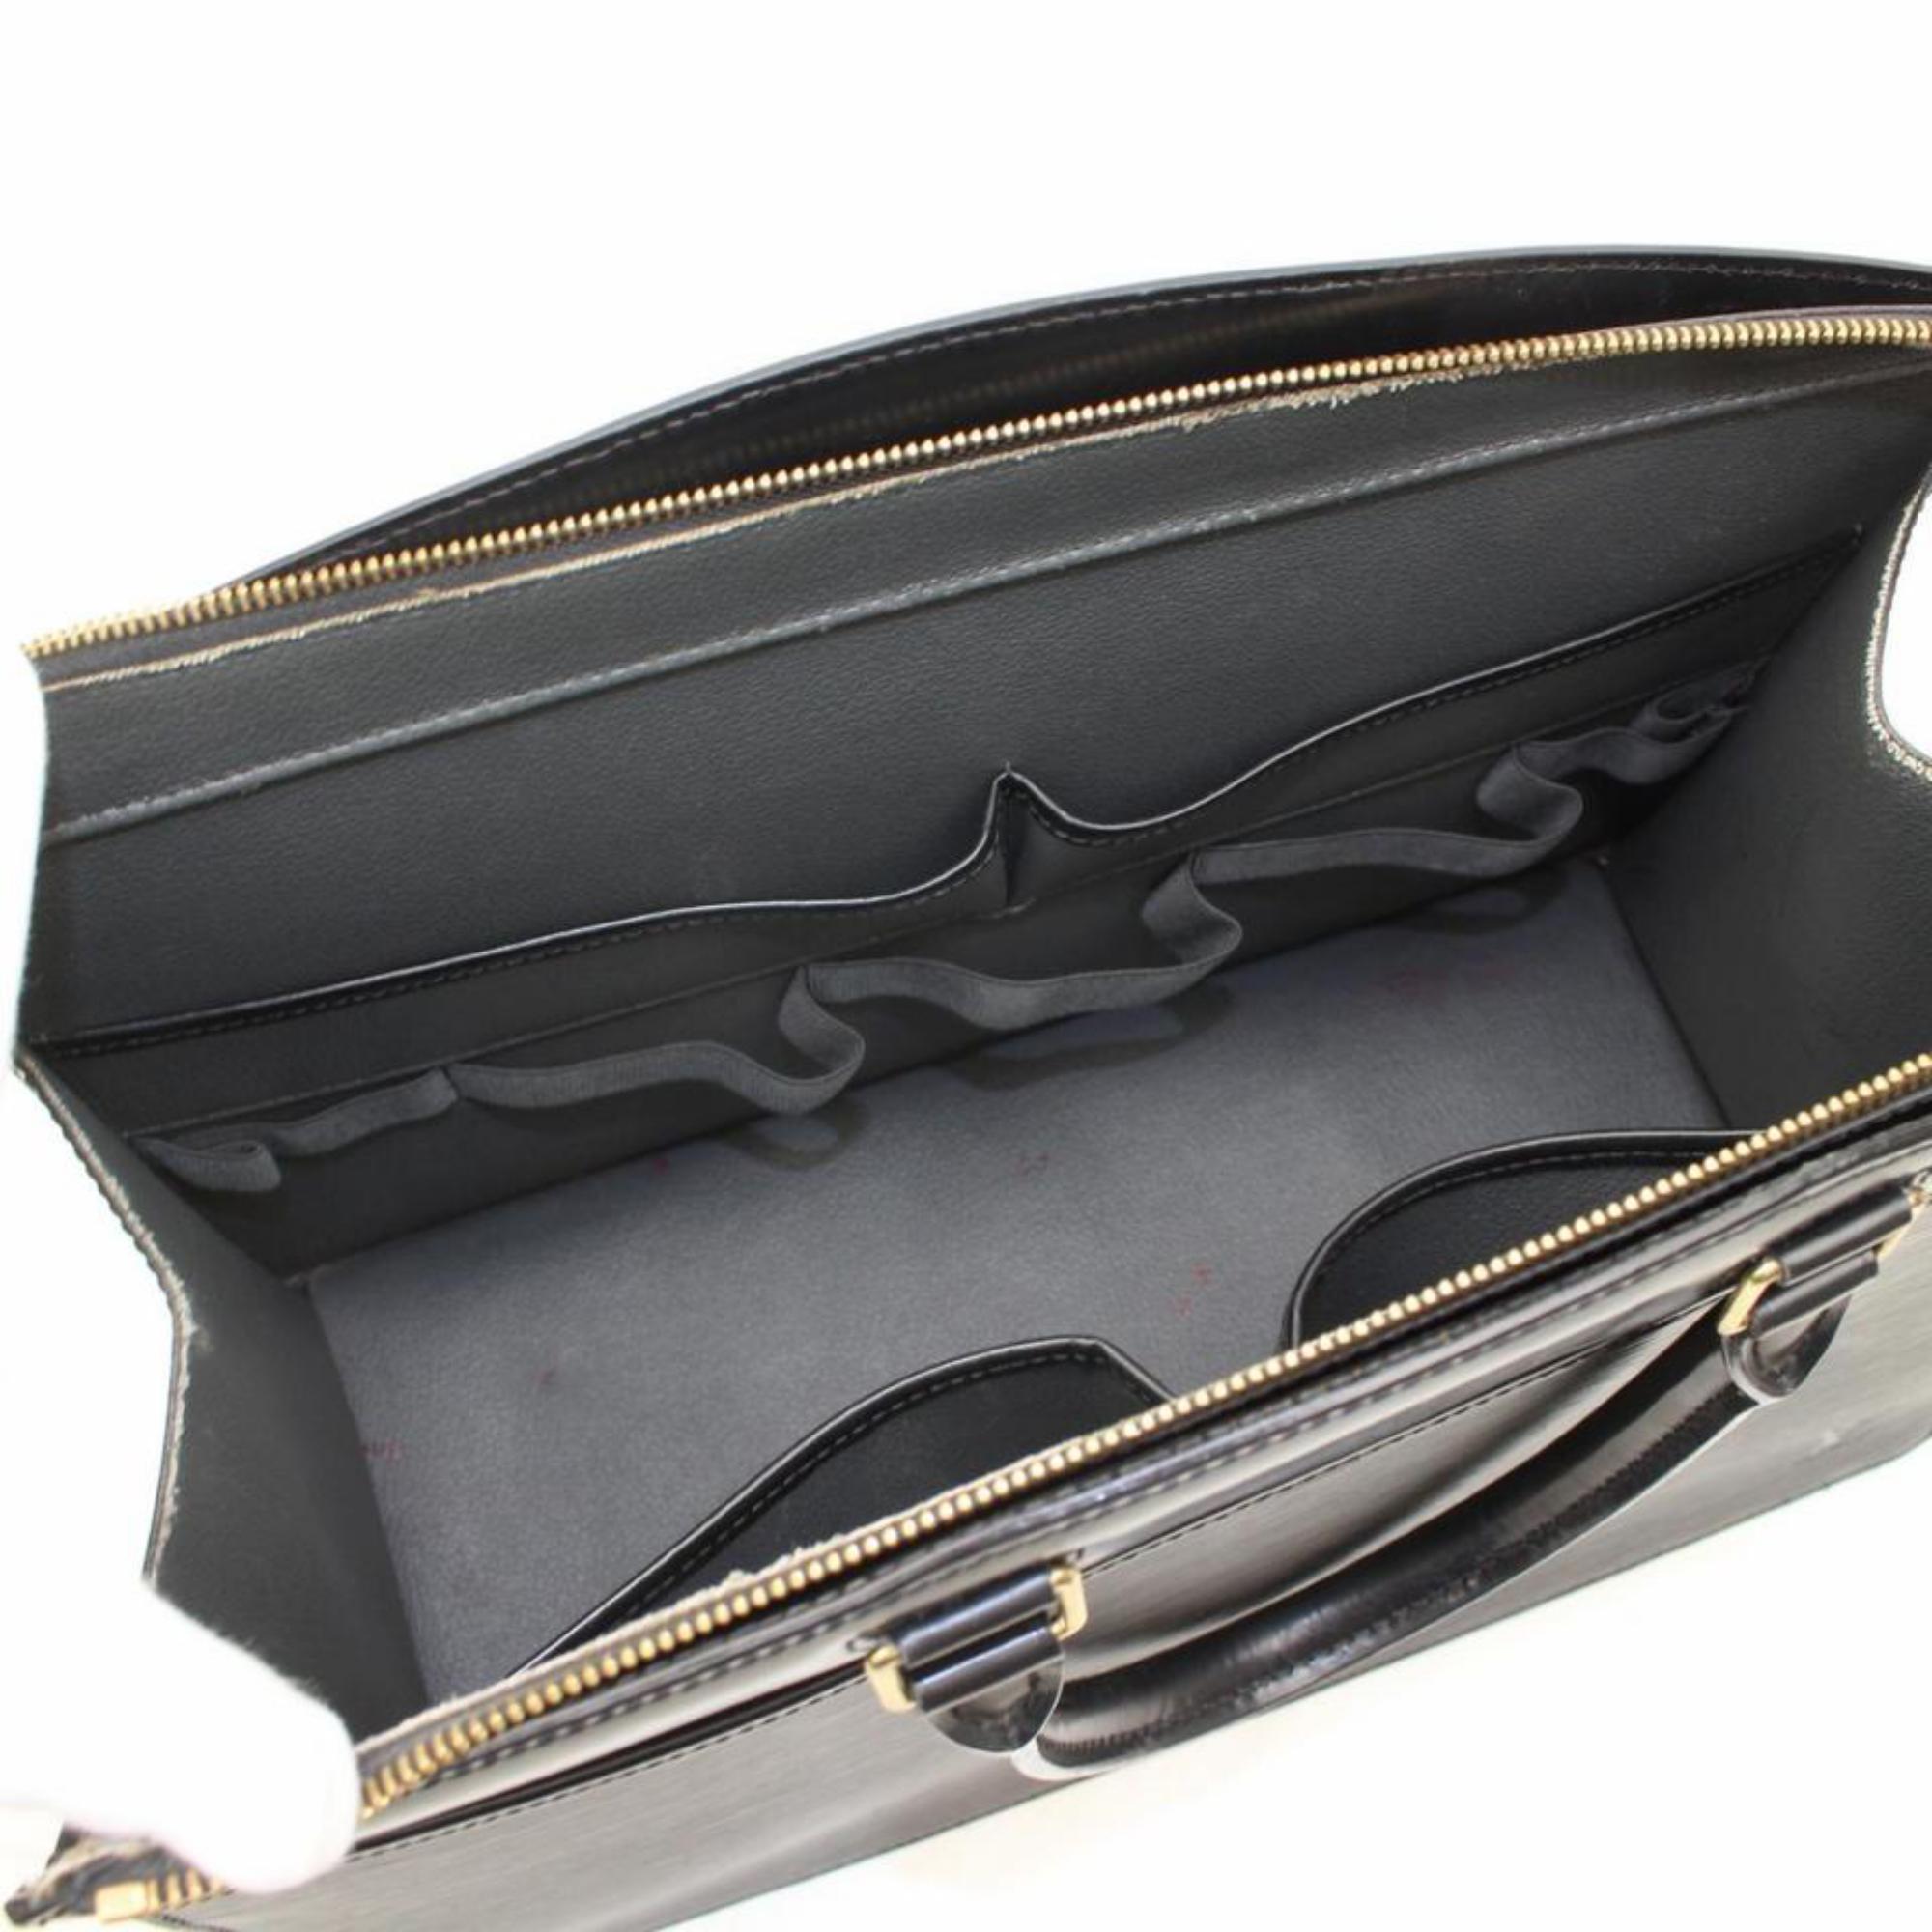 Louis Vuitton Riviera Vanity Case 868557 Black Leather Satchel In Good Condition For Sale In Forest Hills, NY